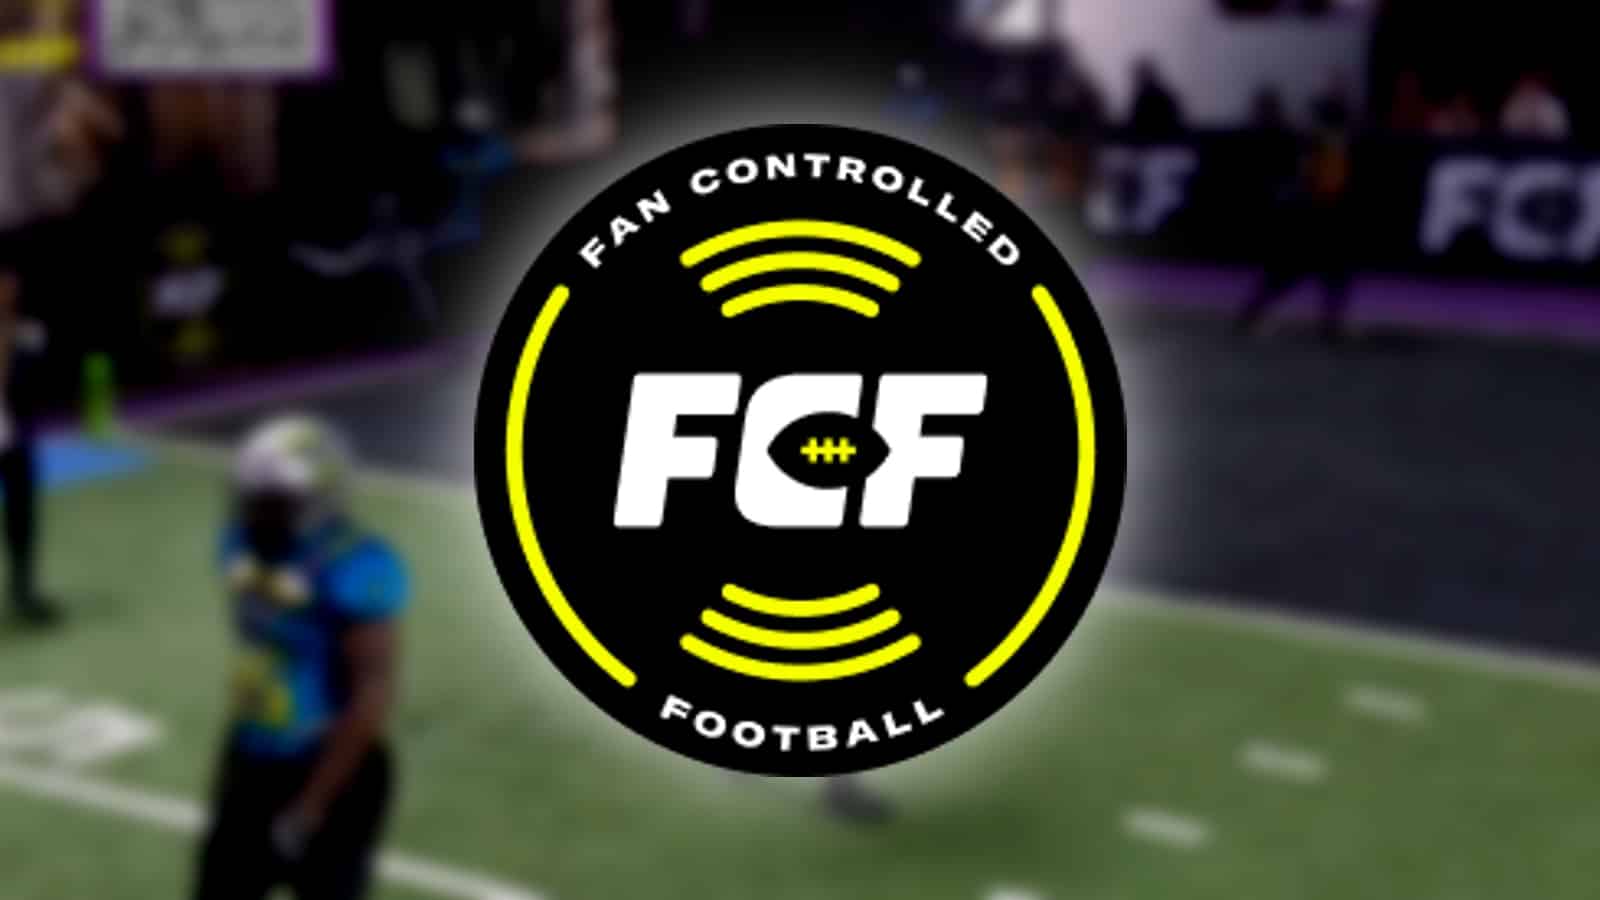 fan controlled football logo on top of gameplay screenshot